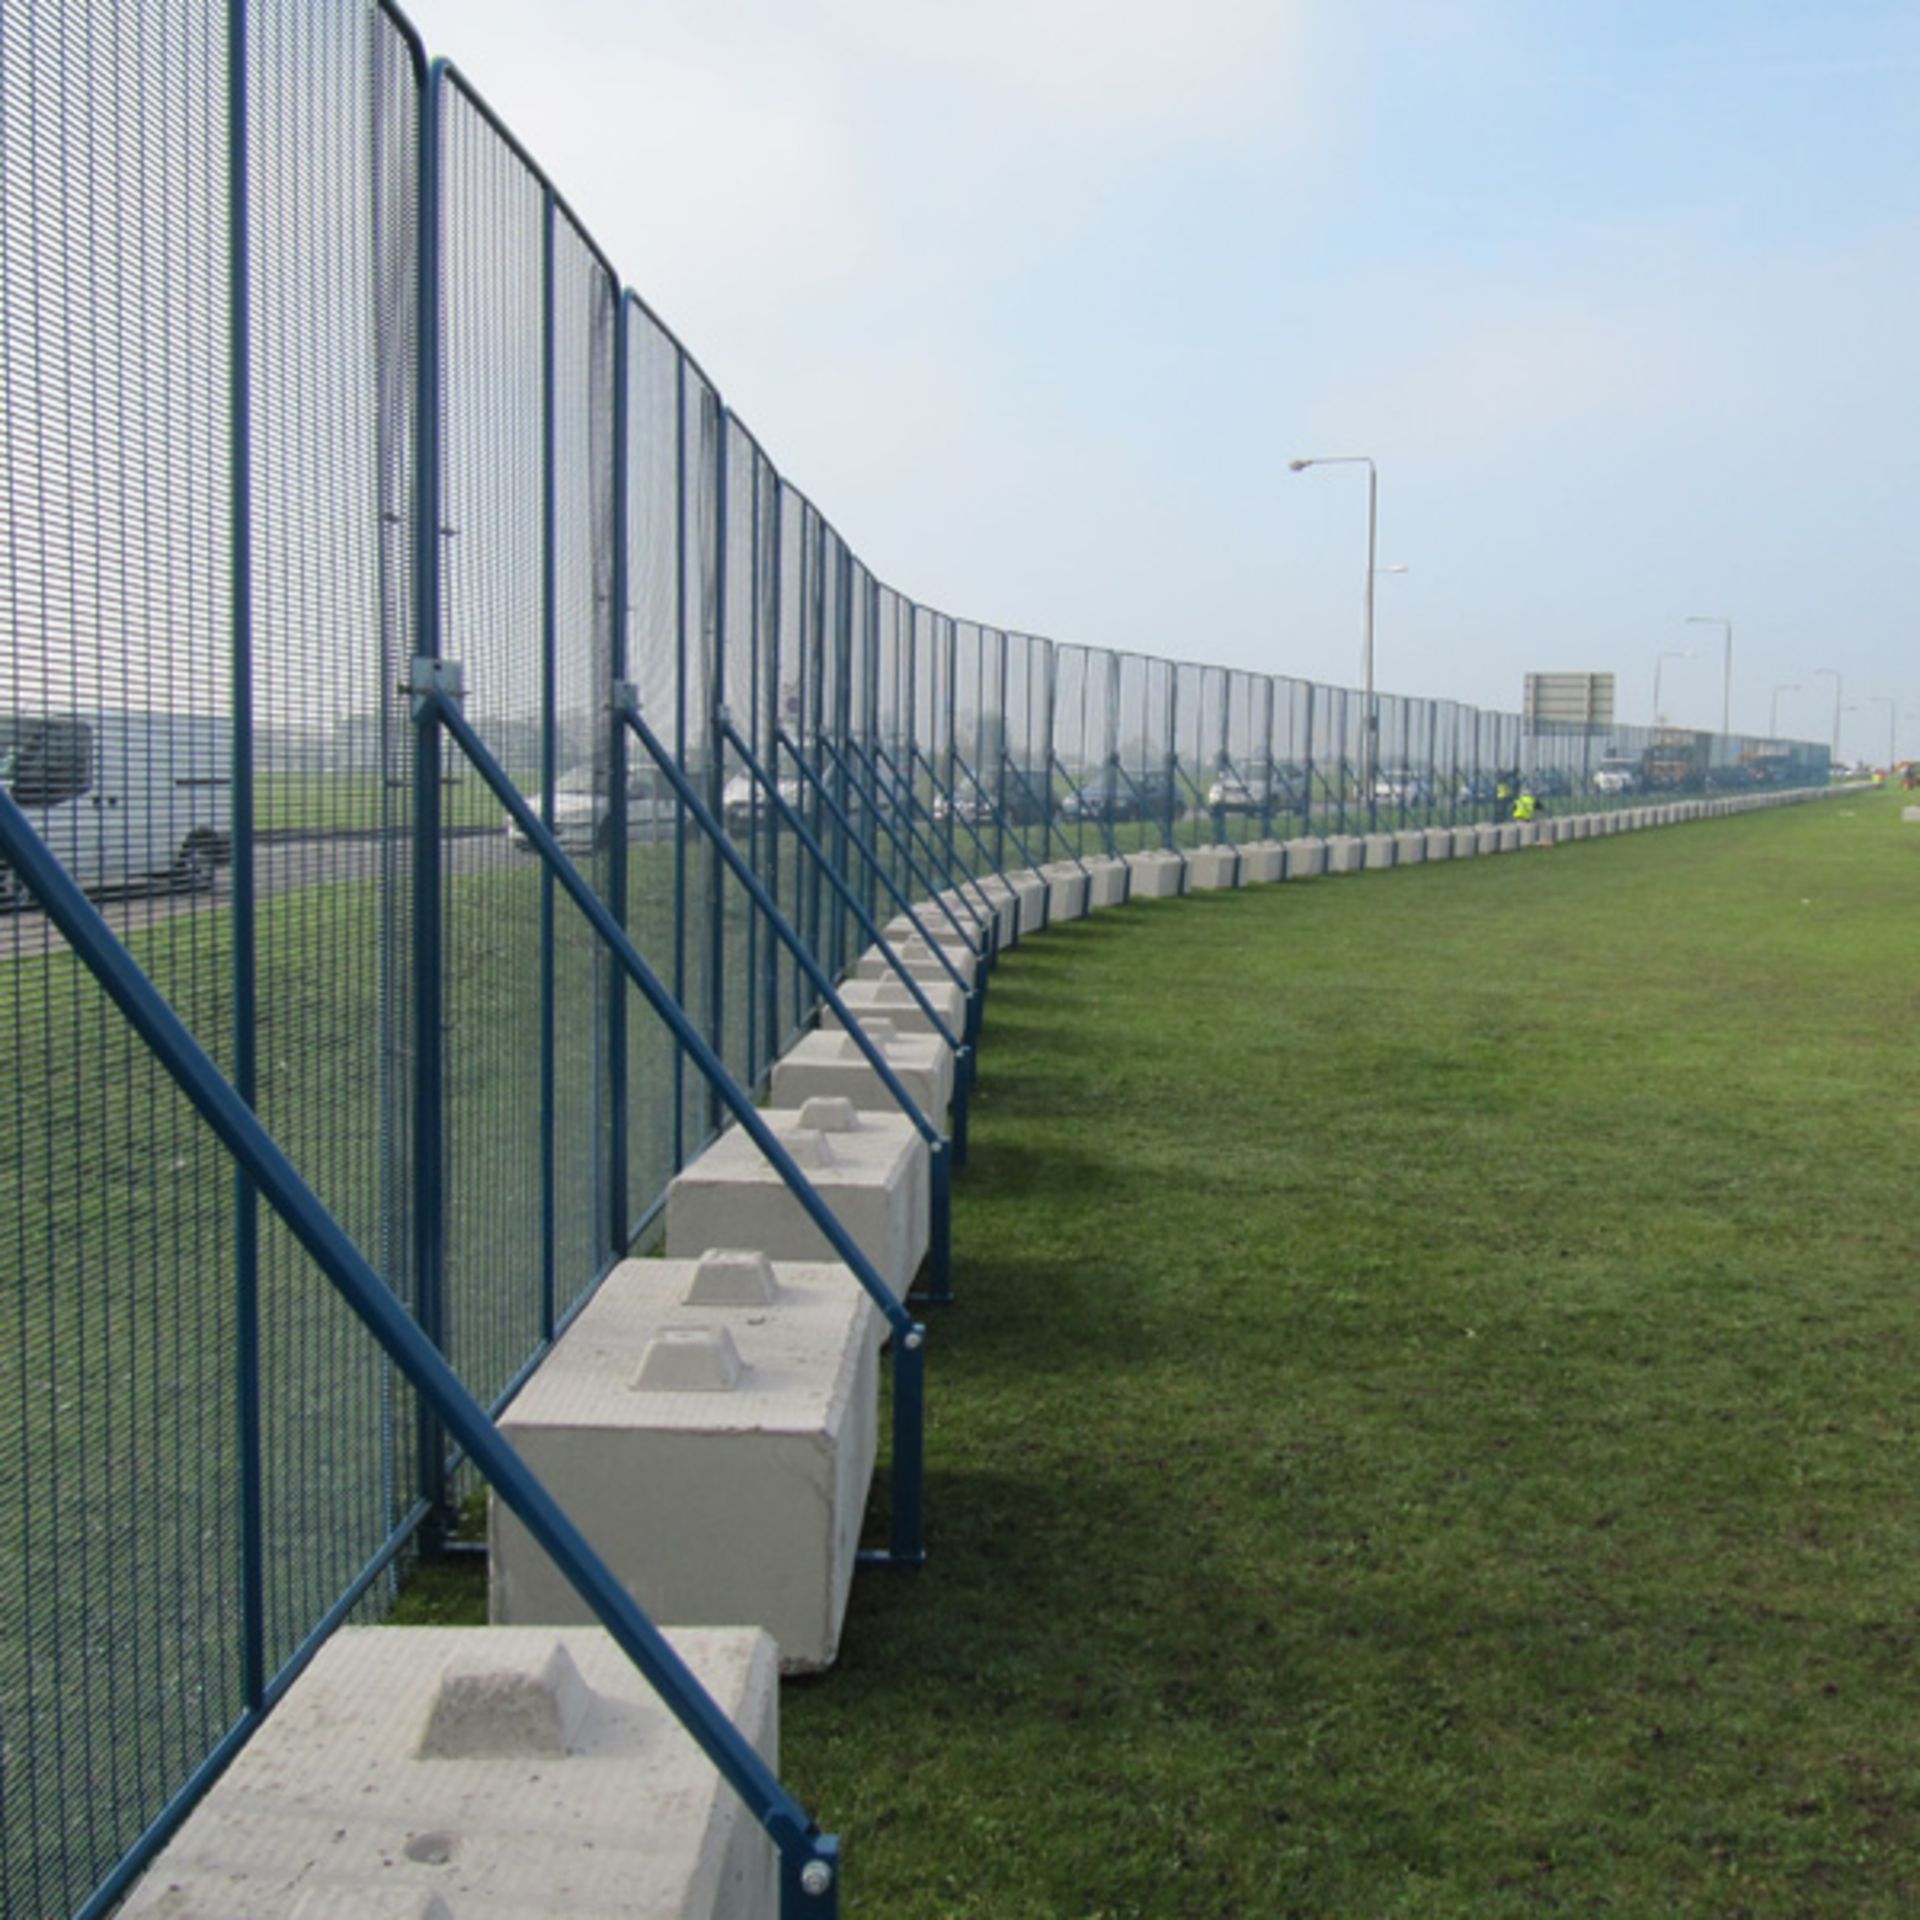 STACK OF 40NO EXTRA HEAVY DUTY ANTI CLIMB MESH COVERED RELOCATABLE FENCE PANELS. 100METRE APPROX - Image 4 of 7